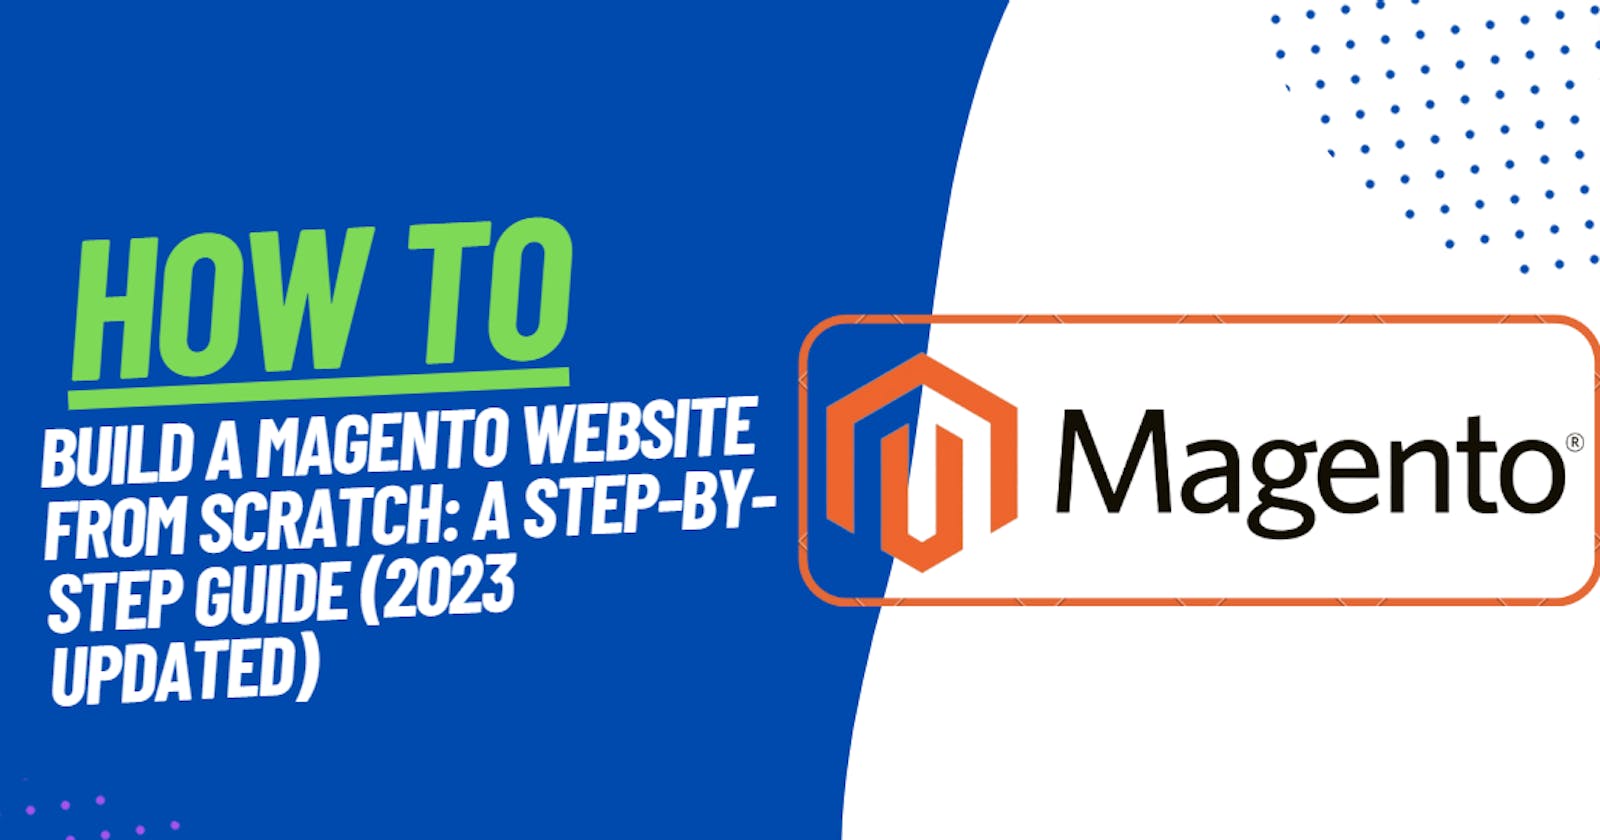 Build a Magento Website from Scratch: A Step-by-Step Guide (2023 updated)